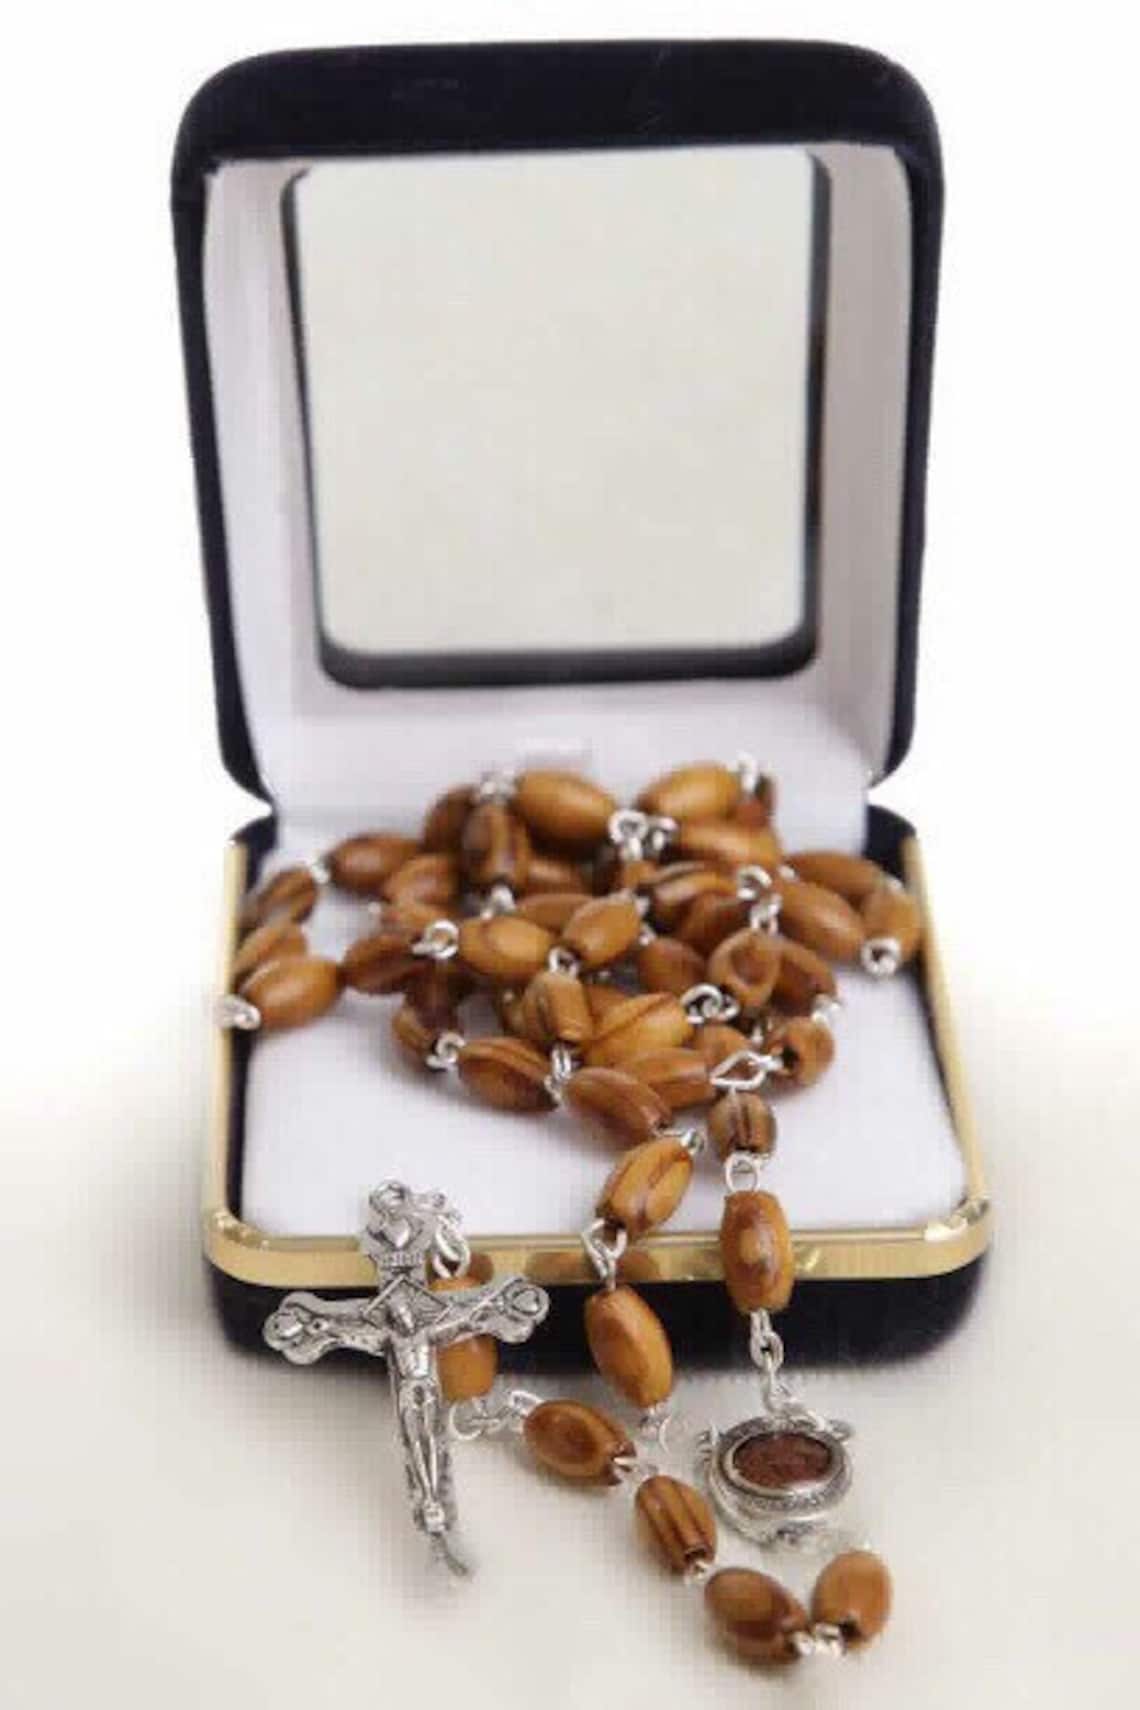 Holy Land Olive Wood Rosary with a Silver Cross and contains Holy Soil from the Holy Land where Jesus walked inside a premium velvet box.